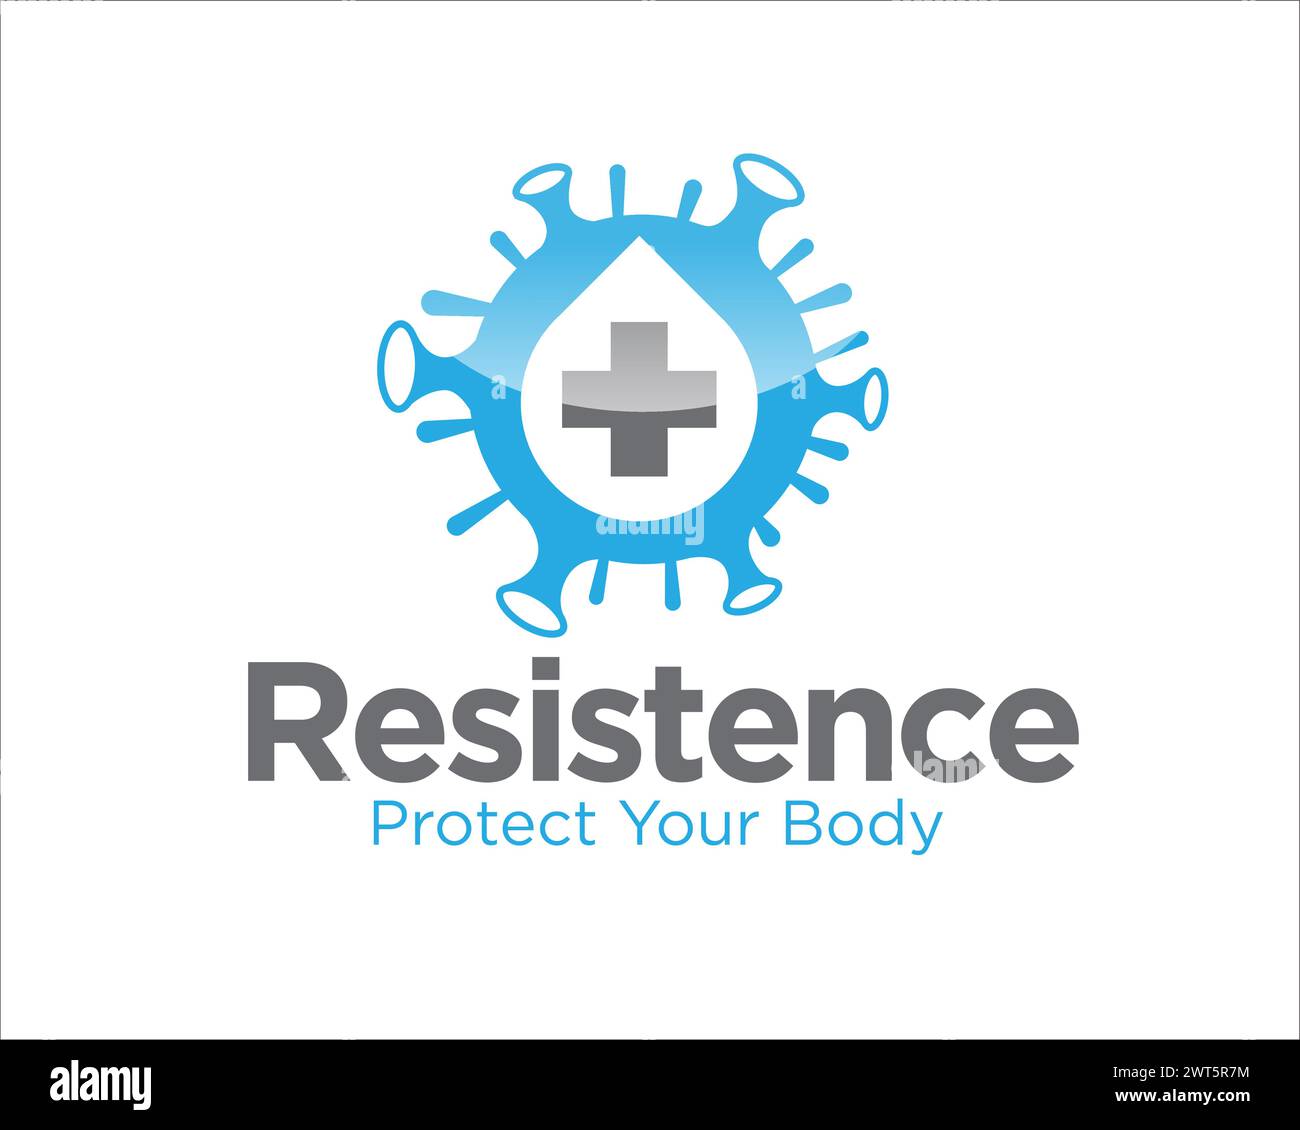 resistance medical protection from virus logo designs Stock Vector